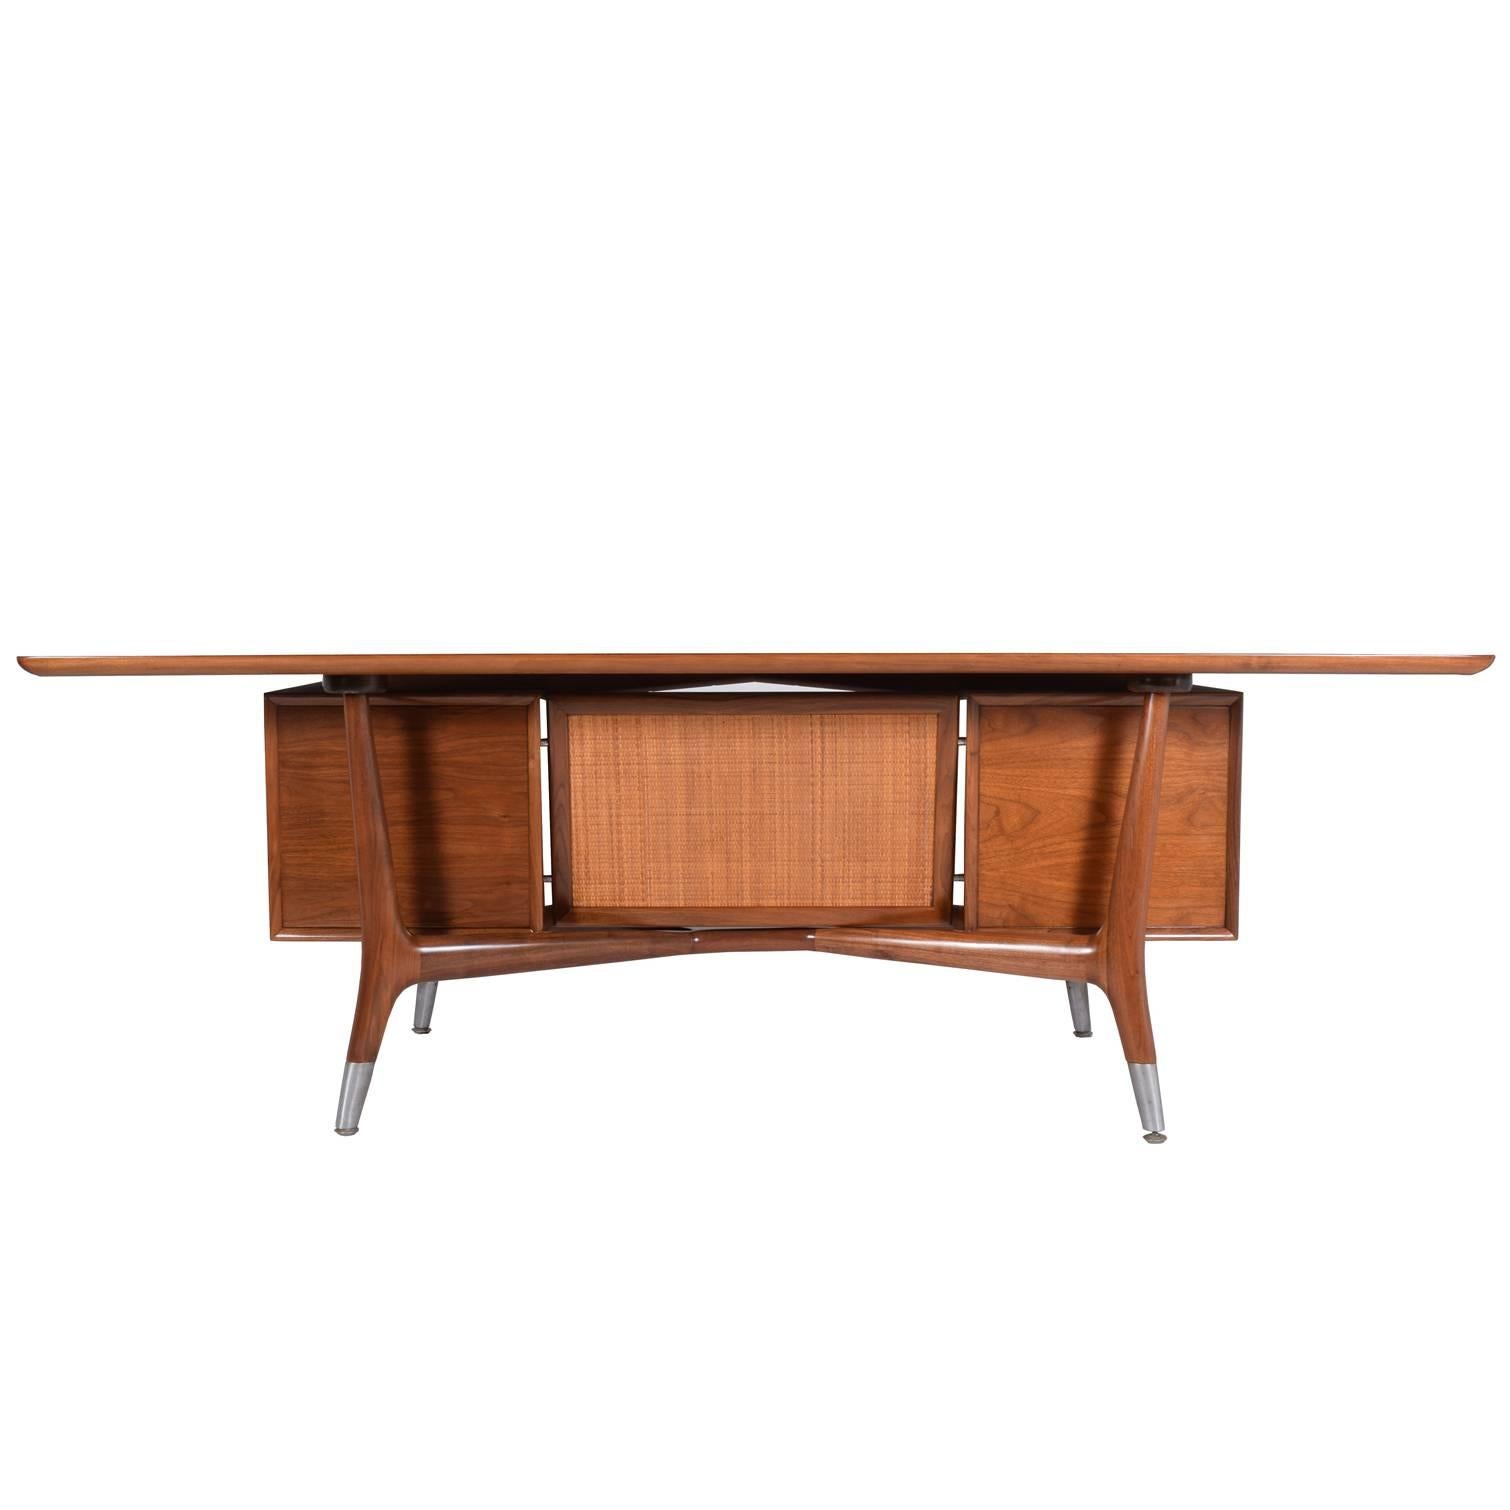 Large Executive American Desk Attributed to Stow Davis